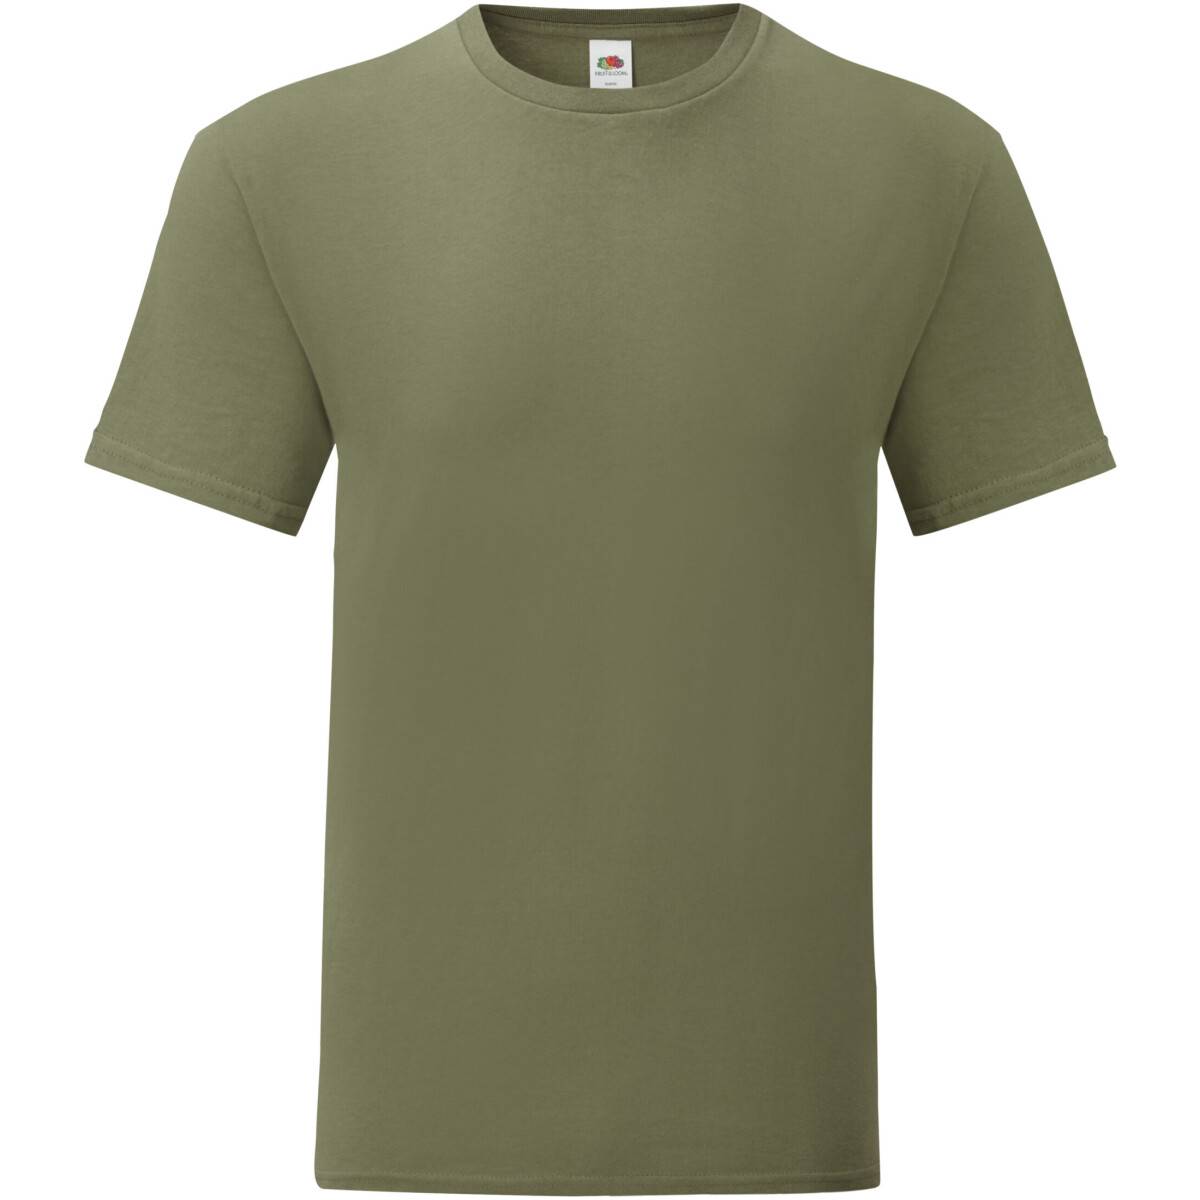 Fruit Of The Loom 61430 Men's Iconic 150 T-Shirt from Lawson HIS